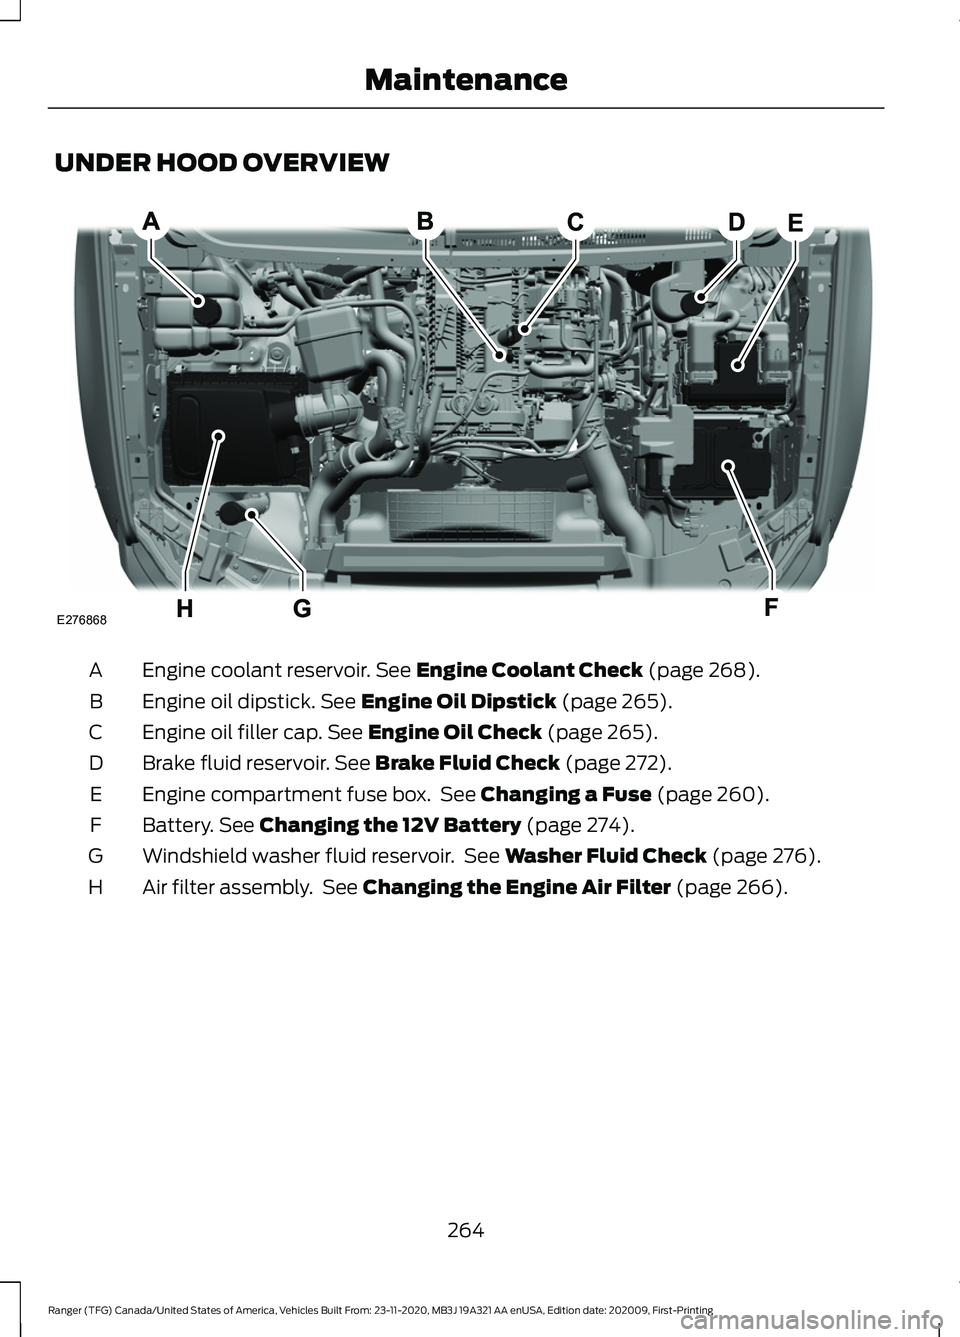 FORD RANGER 2021  Owners Manual UNDER HOOD OVERVIEW
Engine coolant reservoir. See Engine Coolant Check (page 268).
A
Engine oil dipstick.
 See Engine Oil Dipstick (page 265).
B
Engine oil filler cap.
 See Engine Oil Check (page 265)